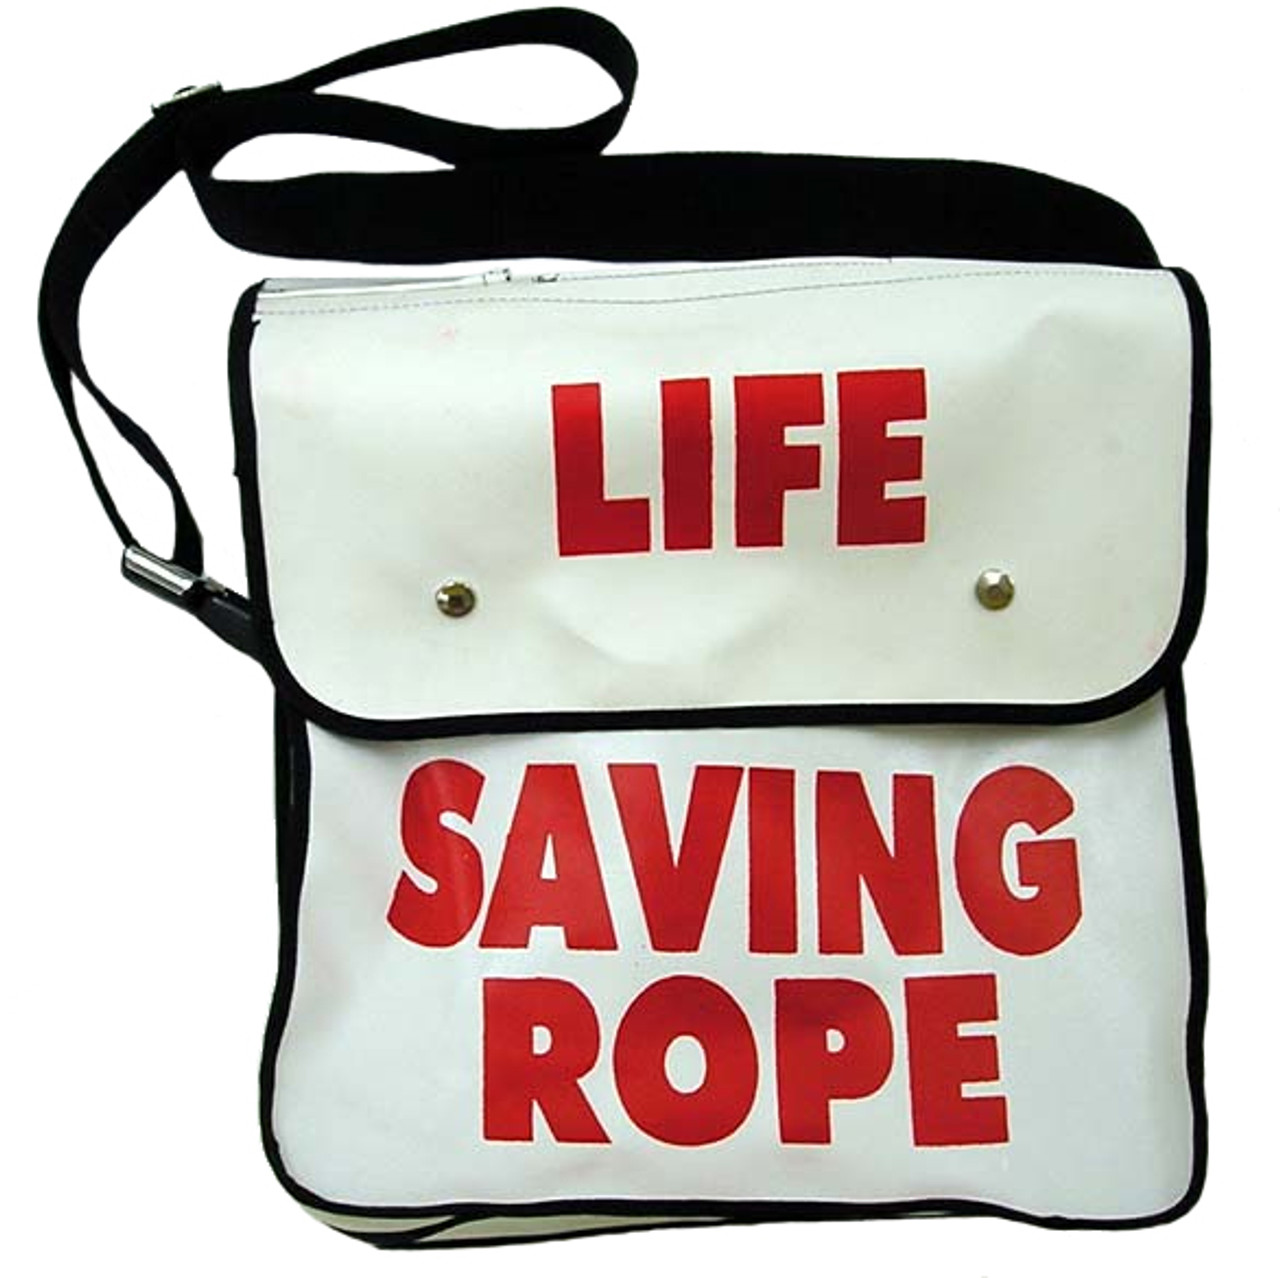 343 Fire FDNY Life Saving Rope Bags